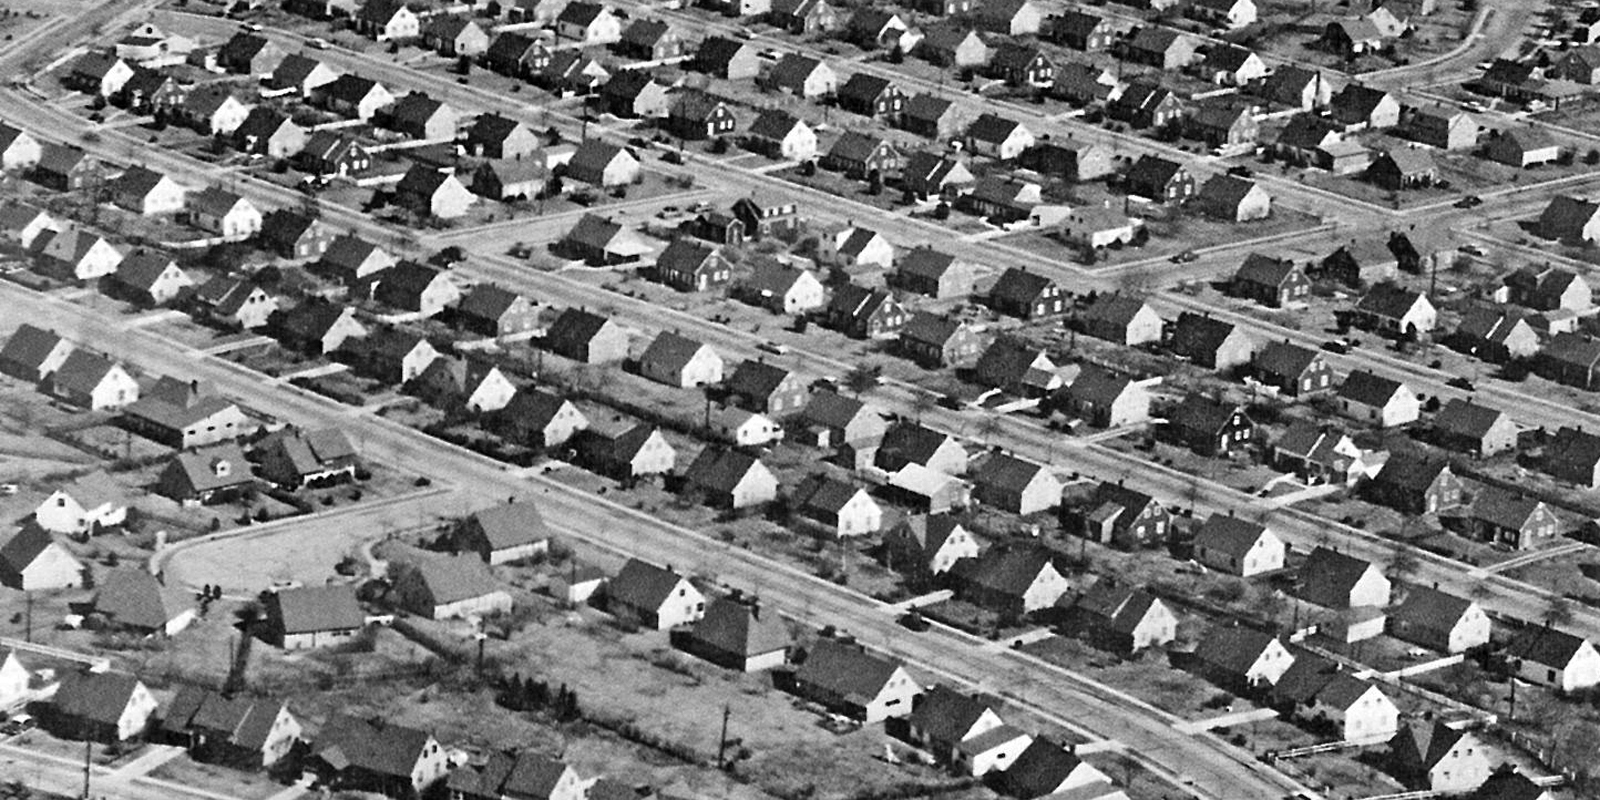 Levittown, early 1950s, via Flickr user markgregory.